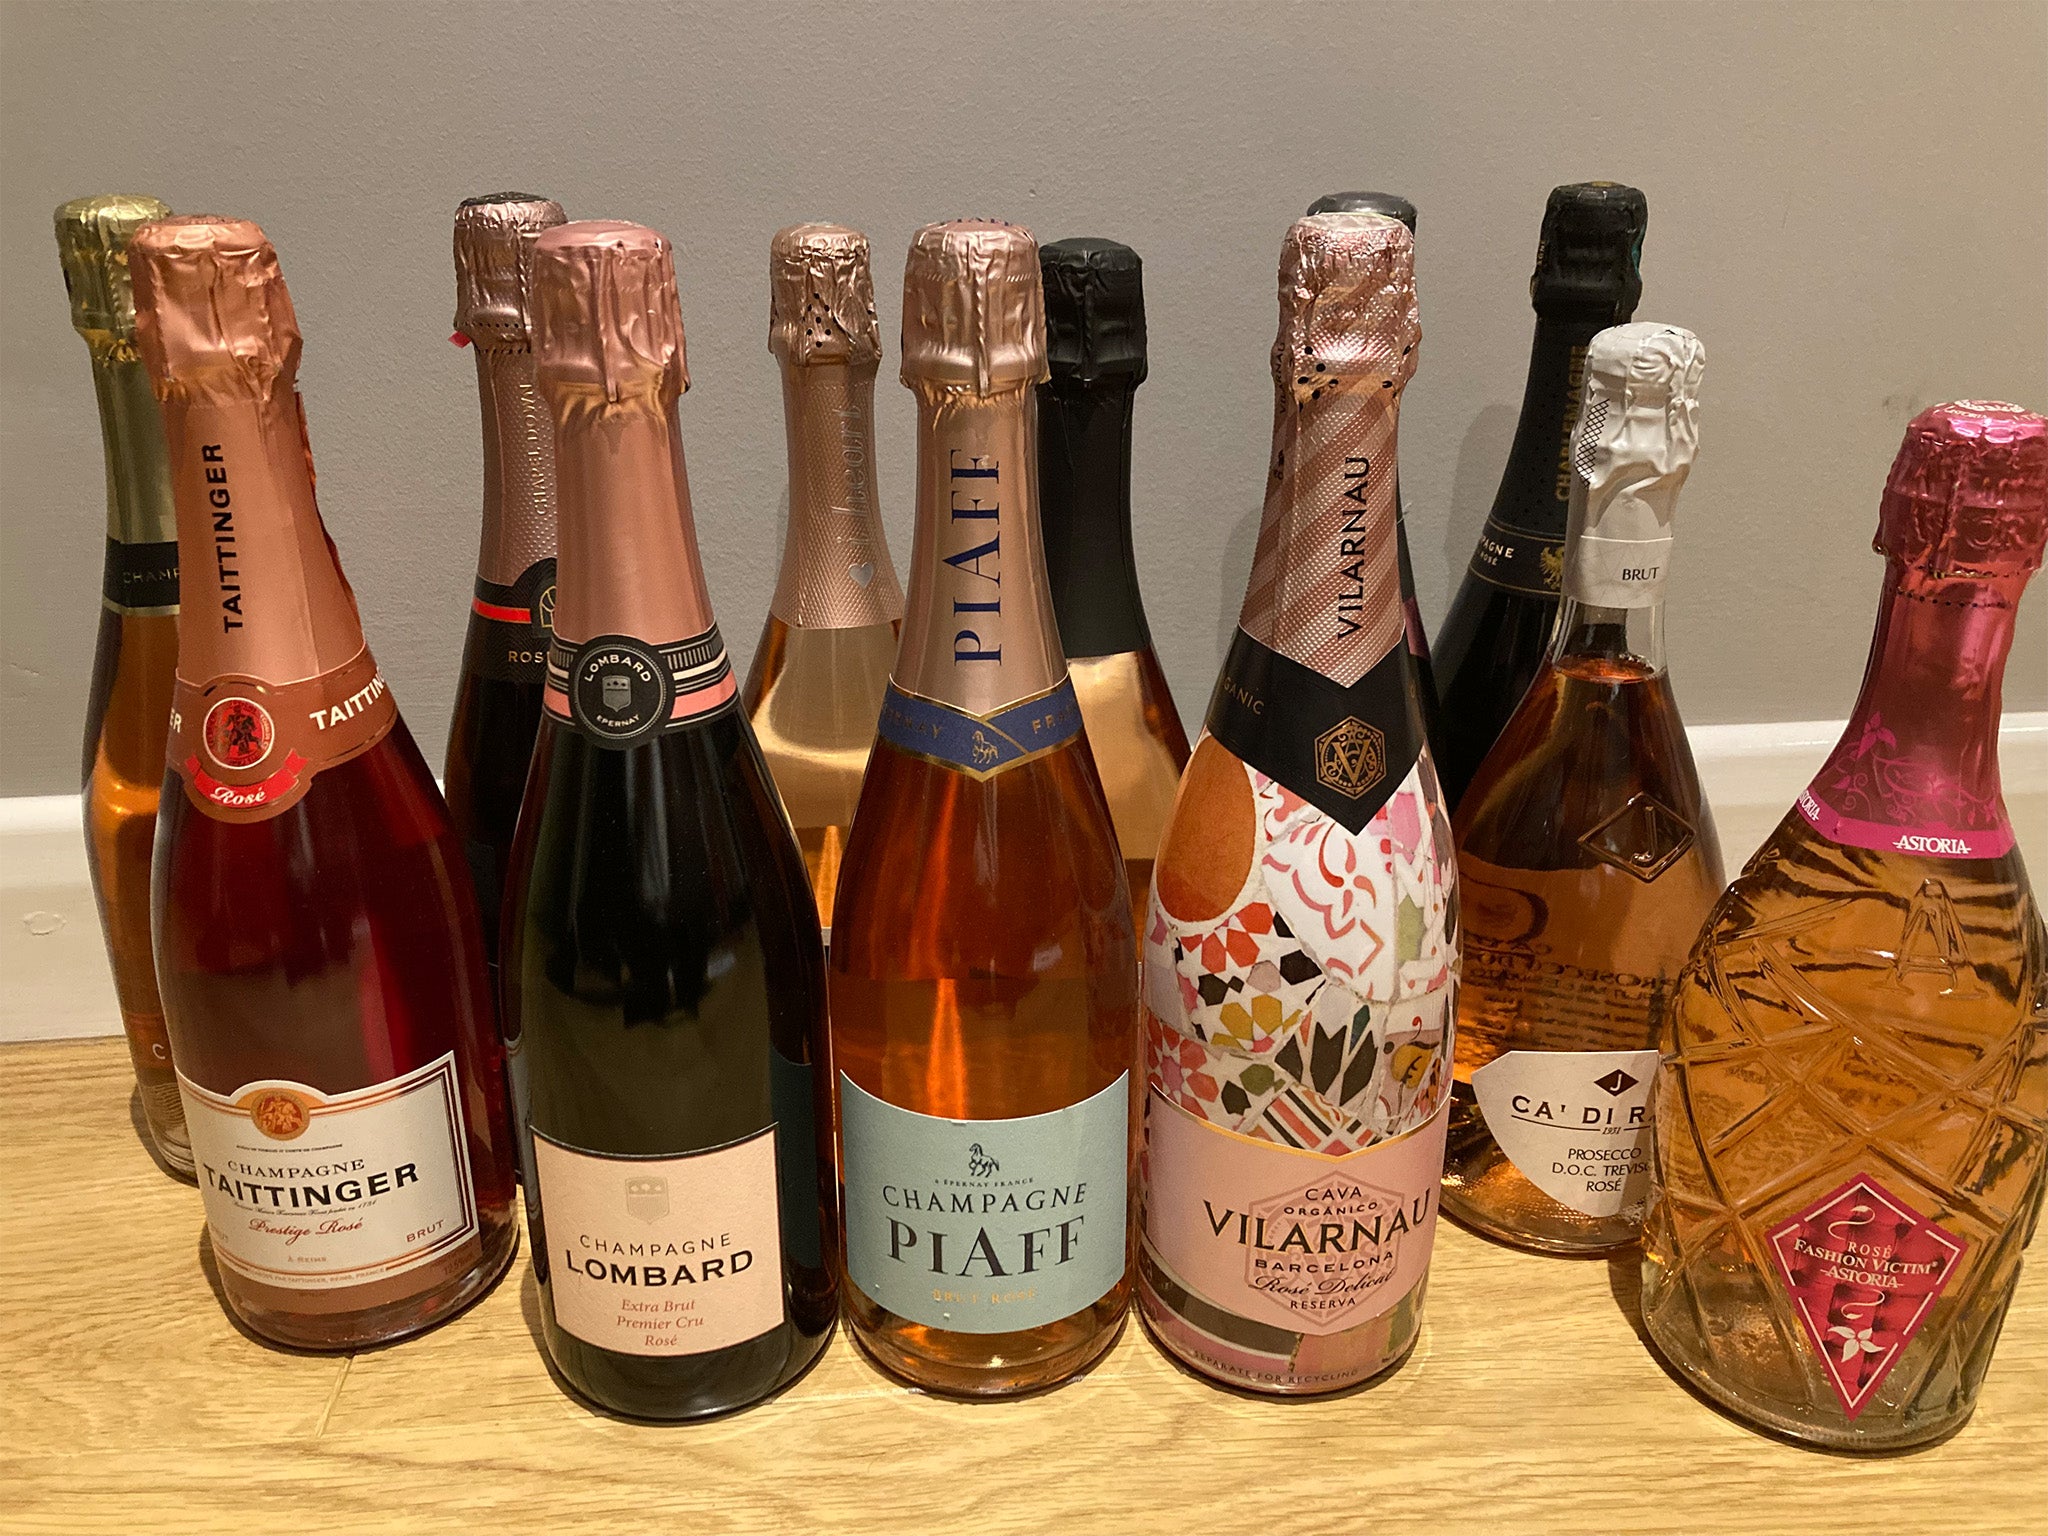 A selection of the rosé fizz we tried